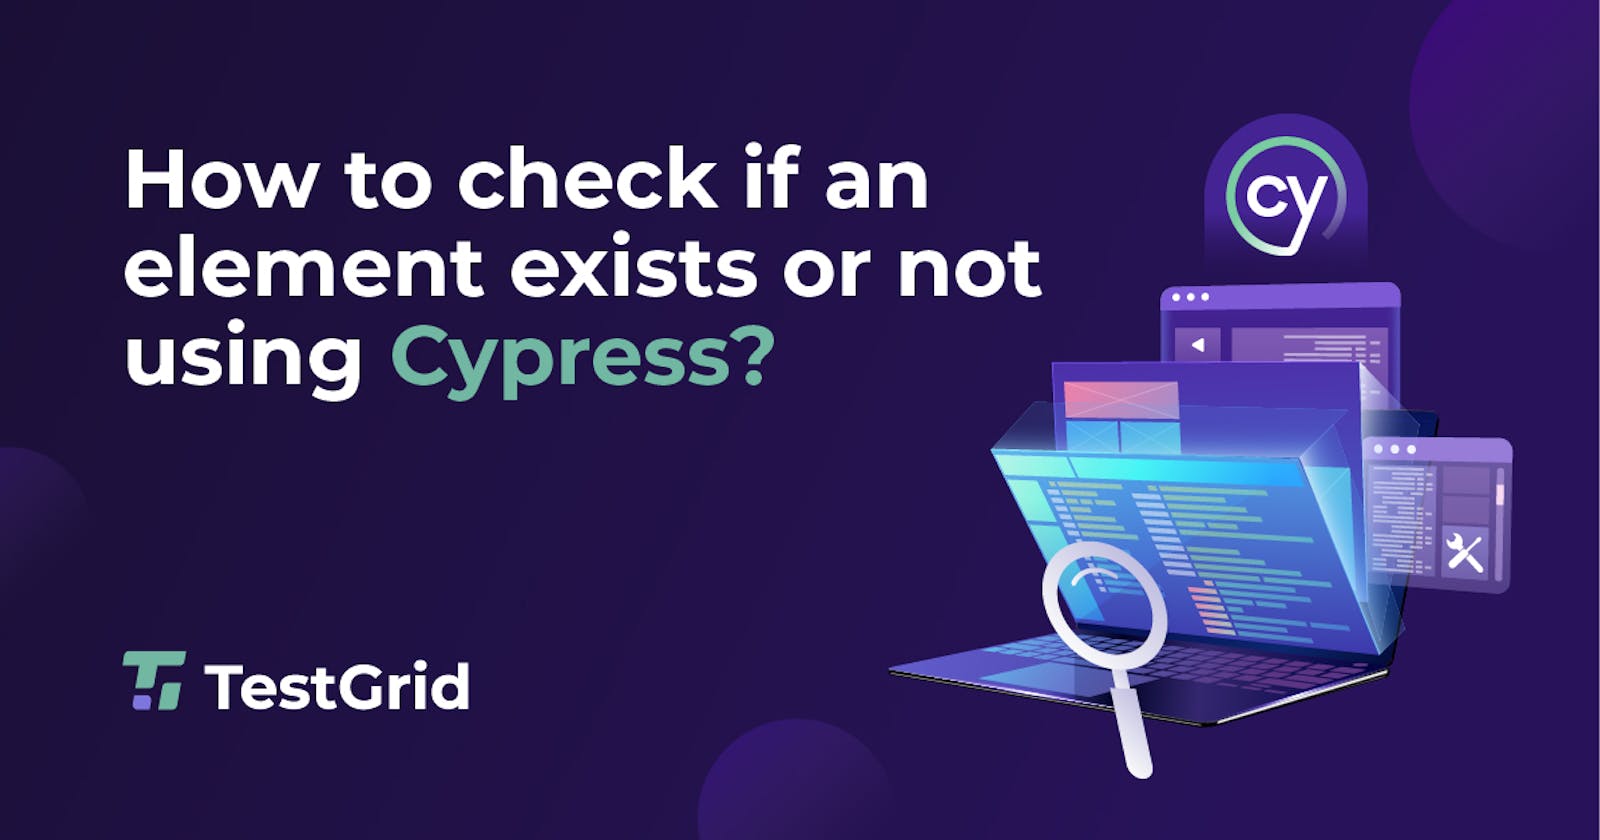 How to check if an element exists or not using Cypress?